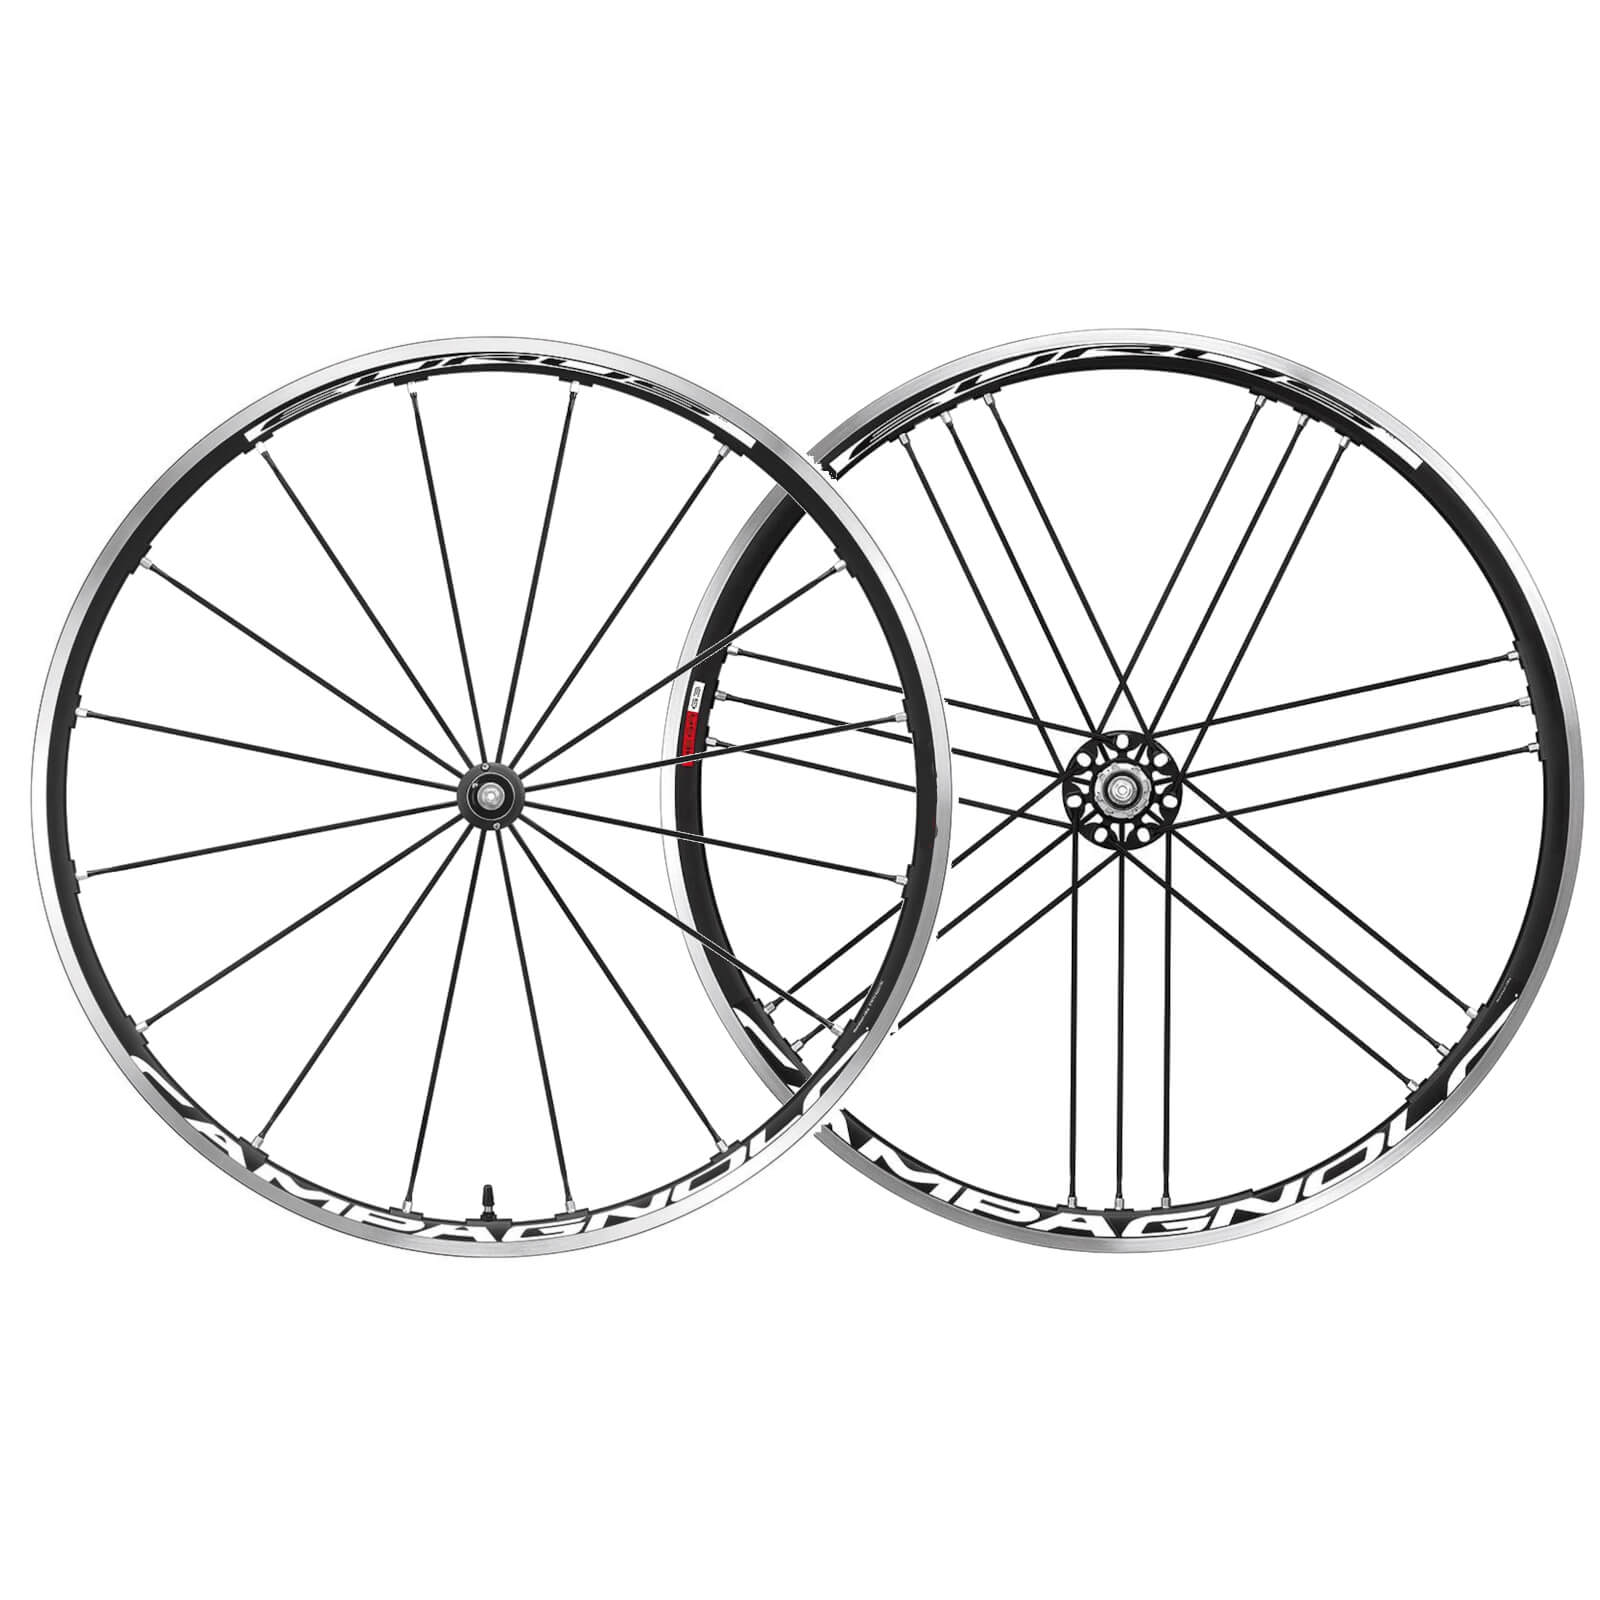 Product Review: Campagnolo Eurus Road Wheelset - Radnut